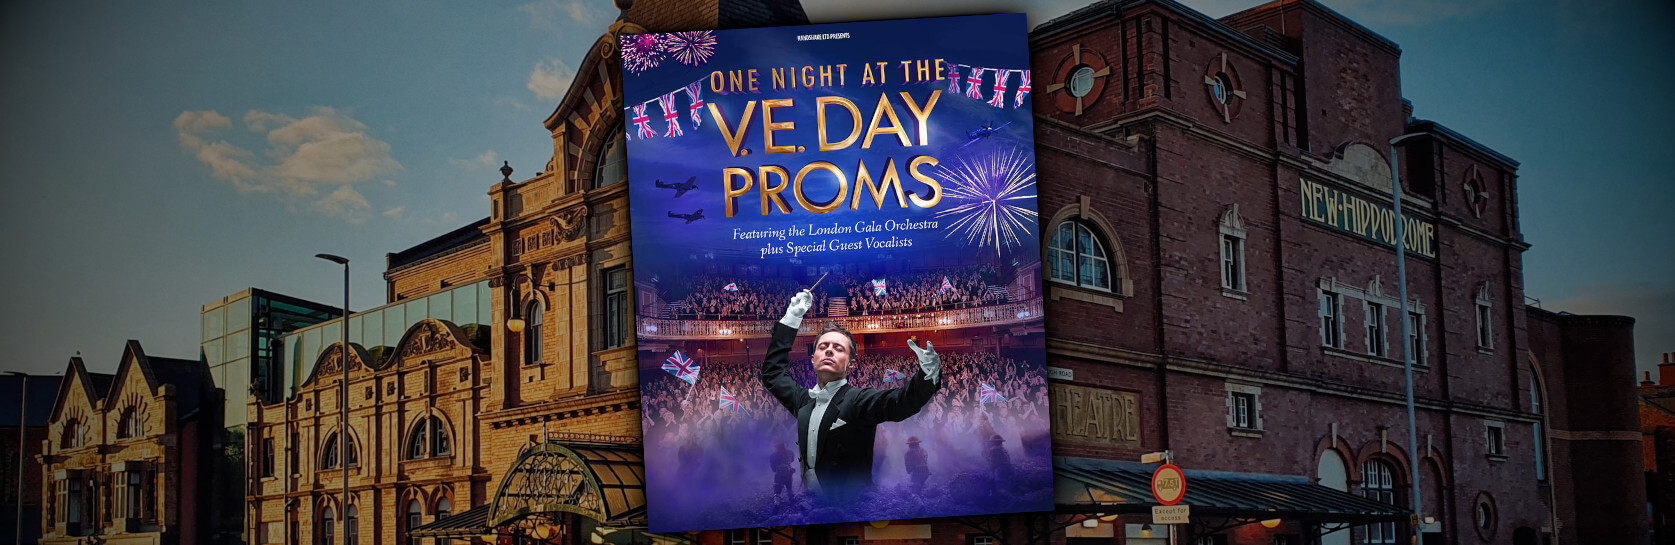 Darlington Hippodrome in search for special guests to attend V.E. Day Proms celebration